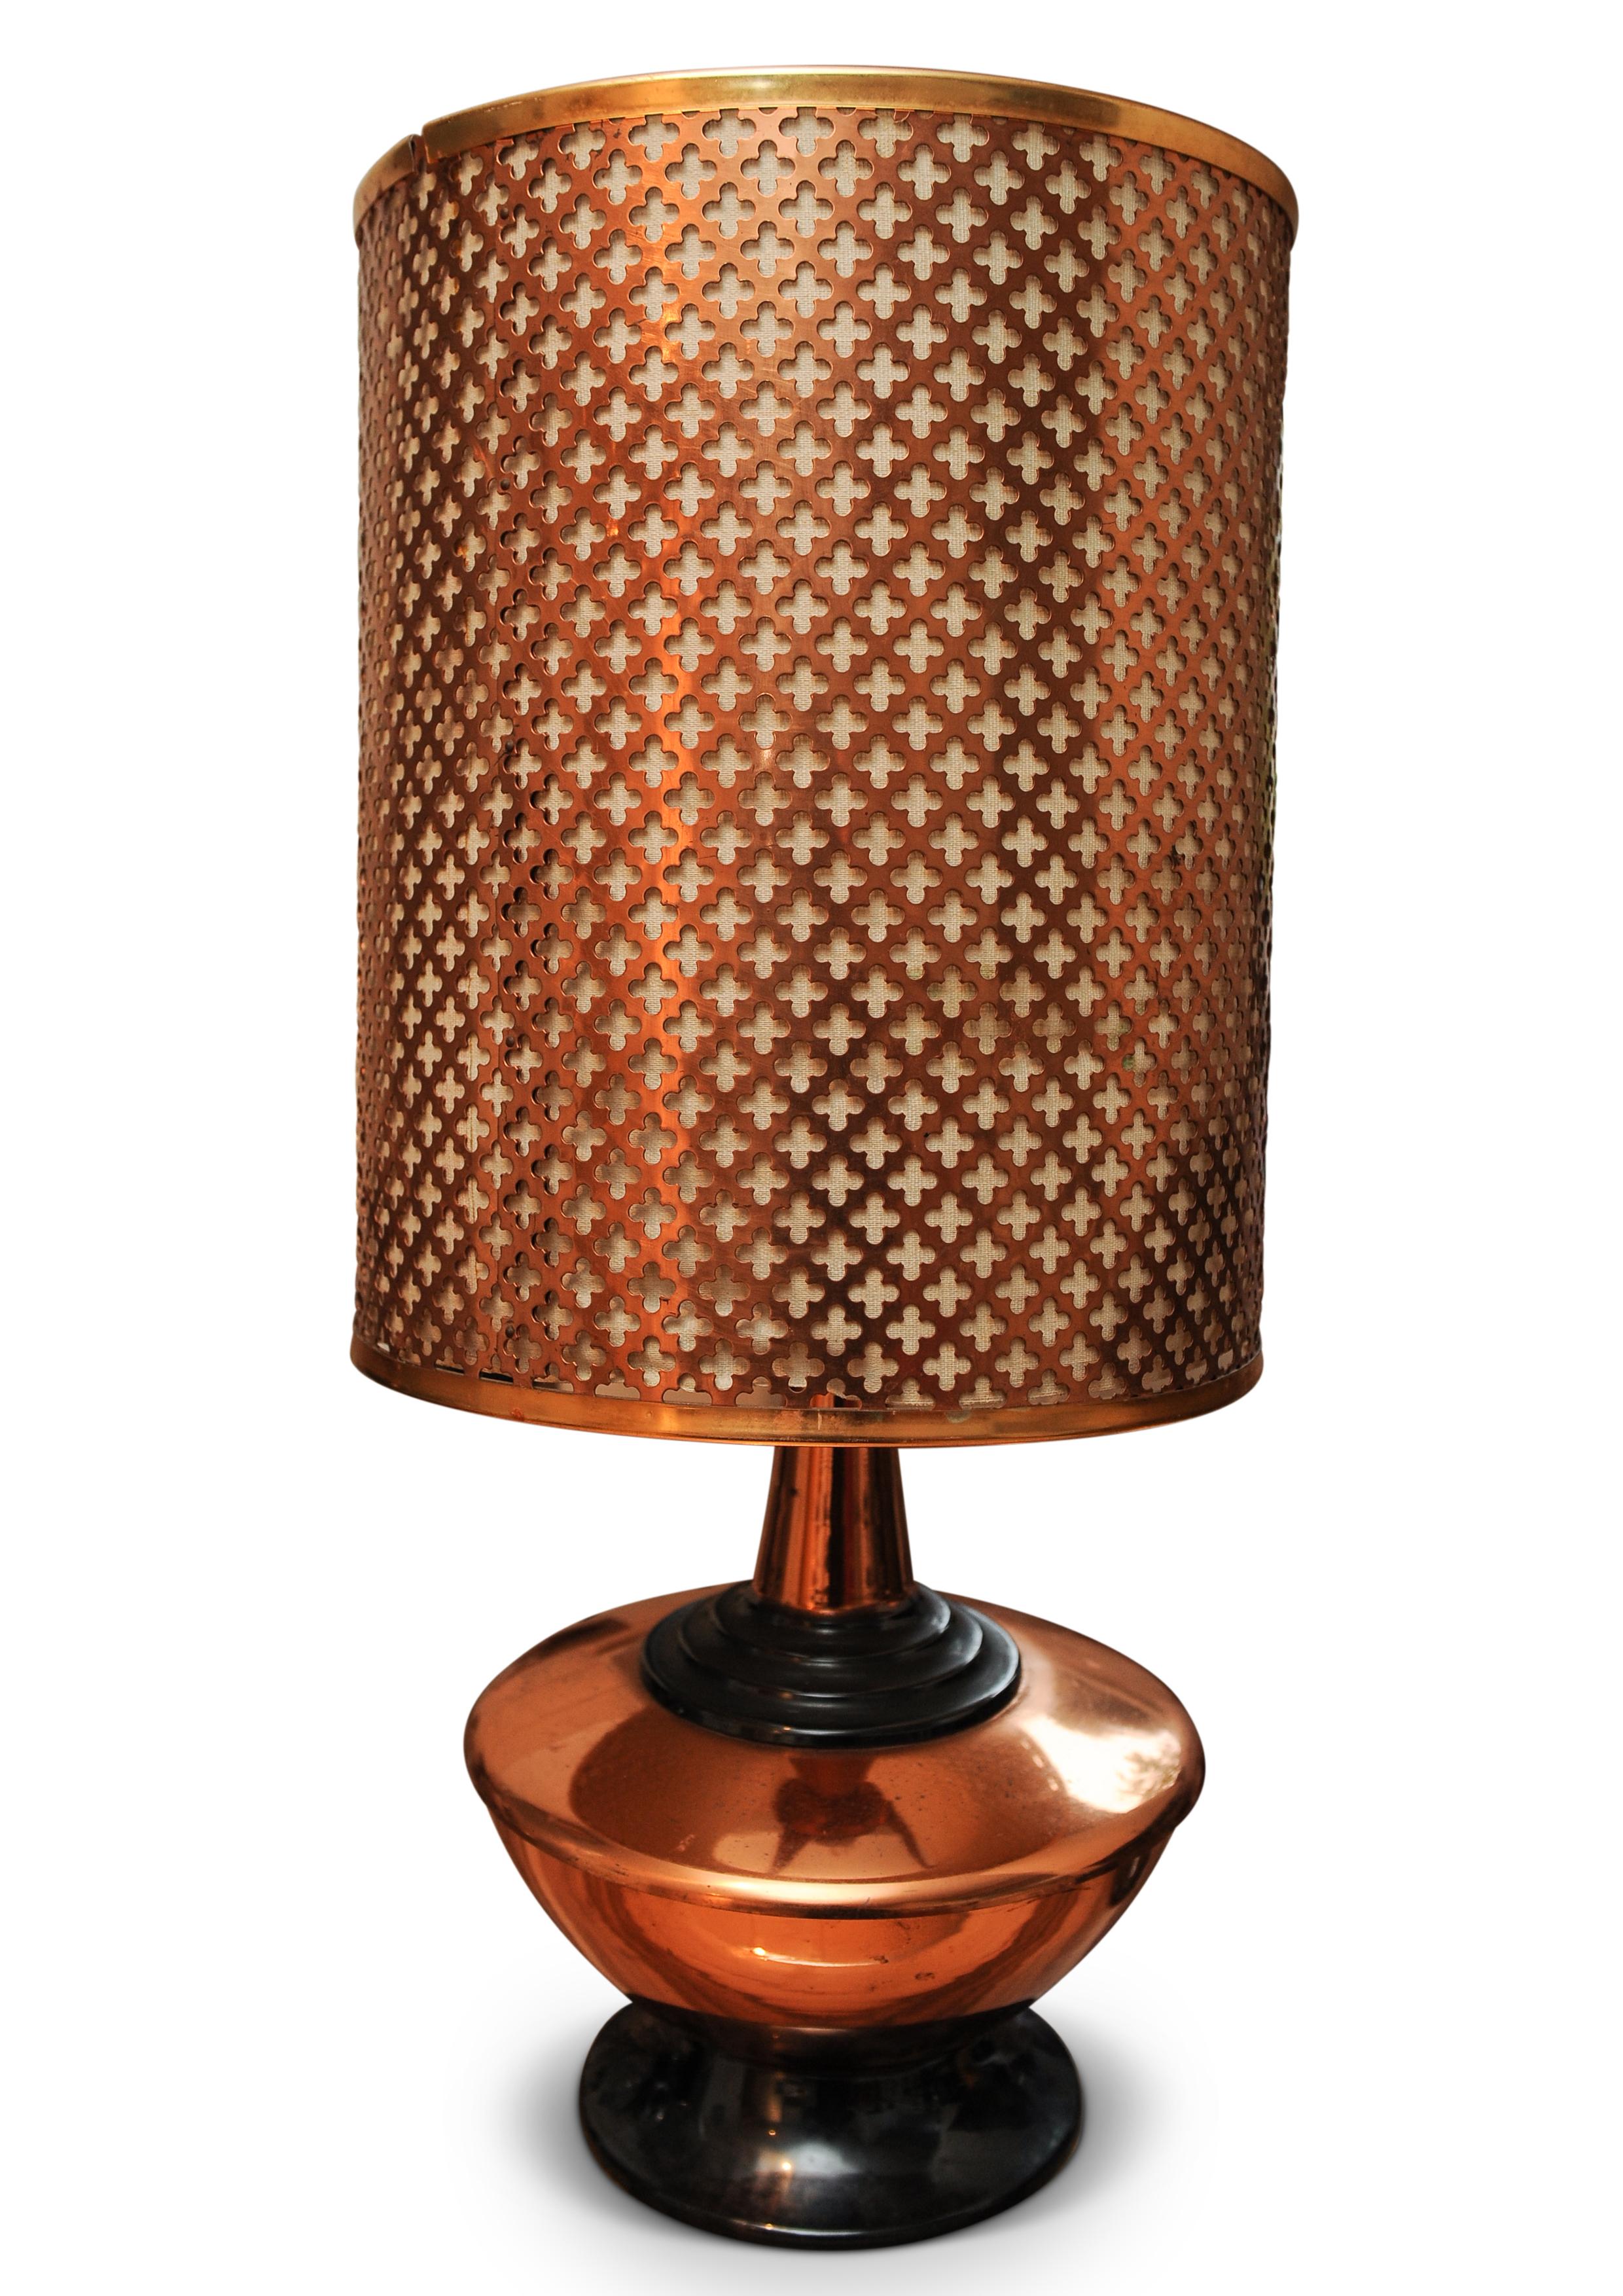 A Zambian Copper Table Lamp With A Repeating Lattice Work Pattern In Good Condition For Sale In High Wycombe, GB